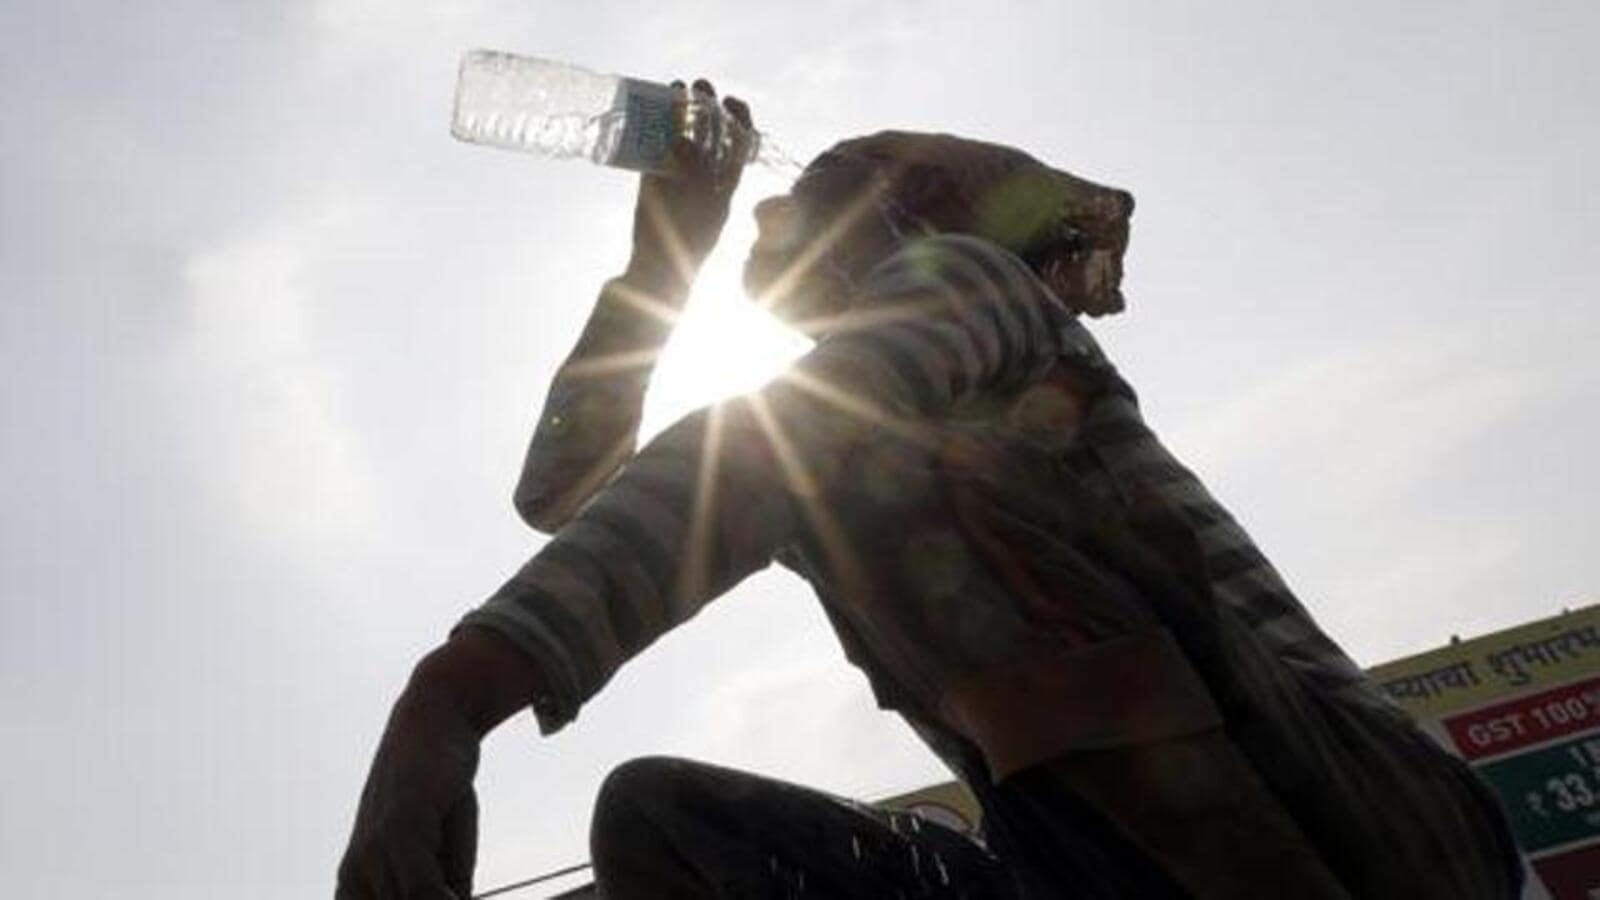 Blistering heat wave to grip India as nationwide lockdown persists